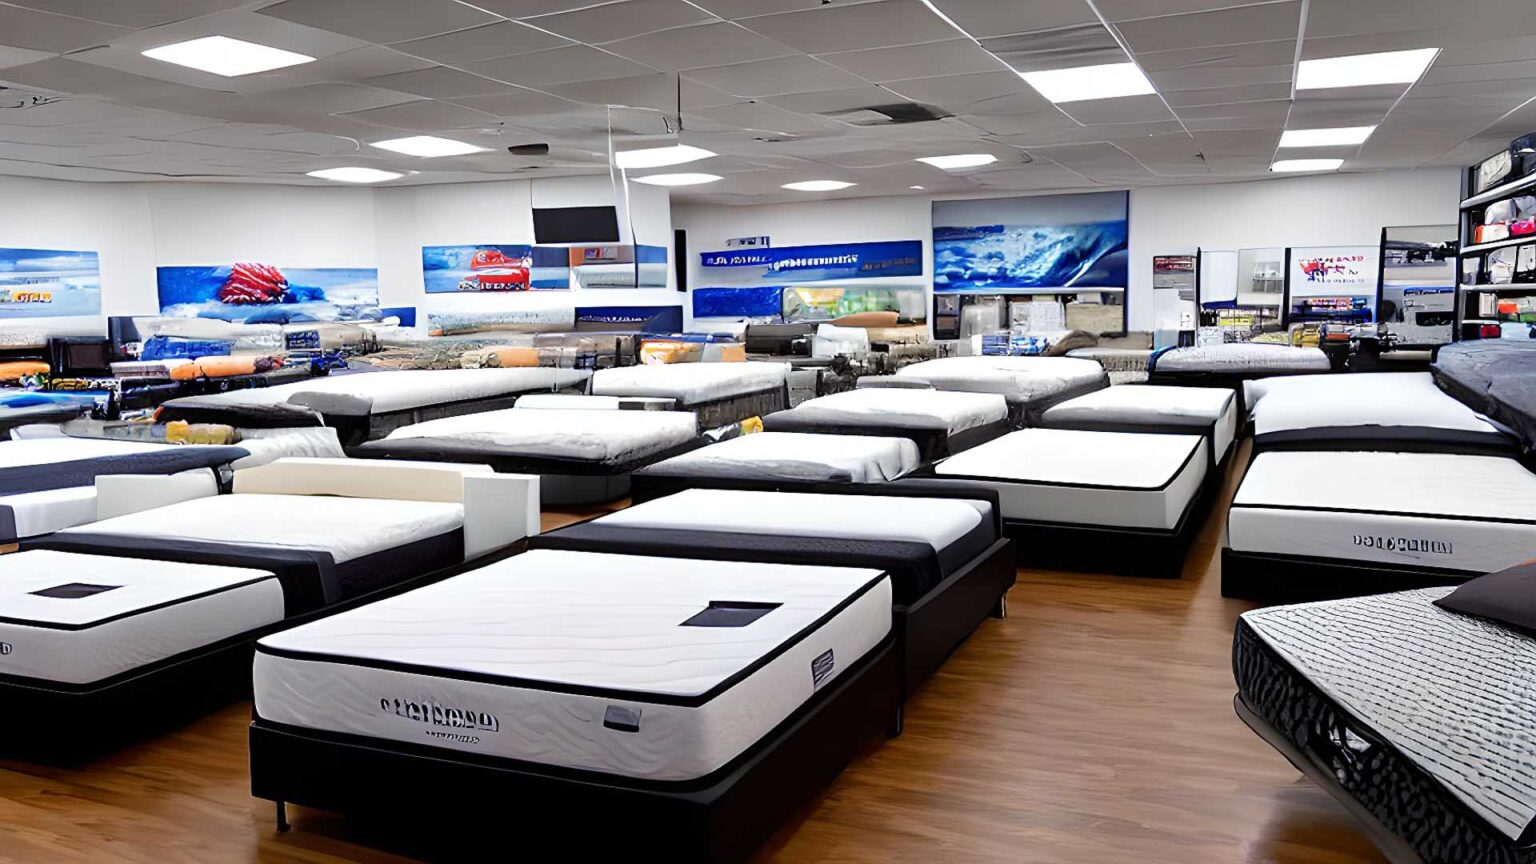 Mattress Stores, mattress dealers, and mattress retailers near me in Blue Springs, MO